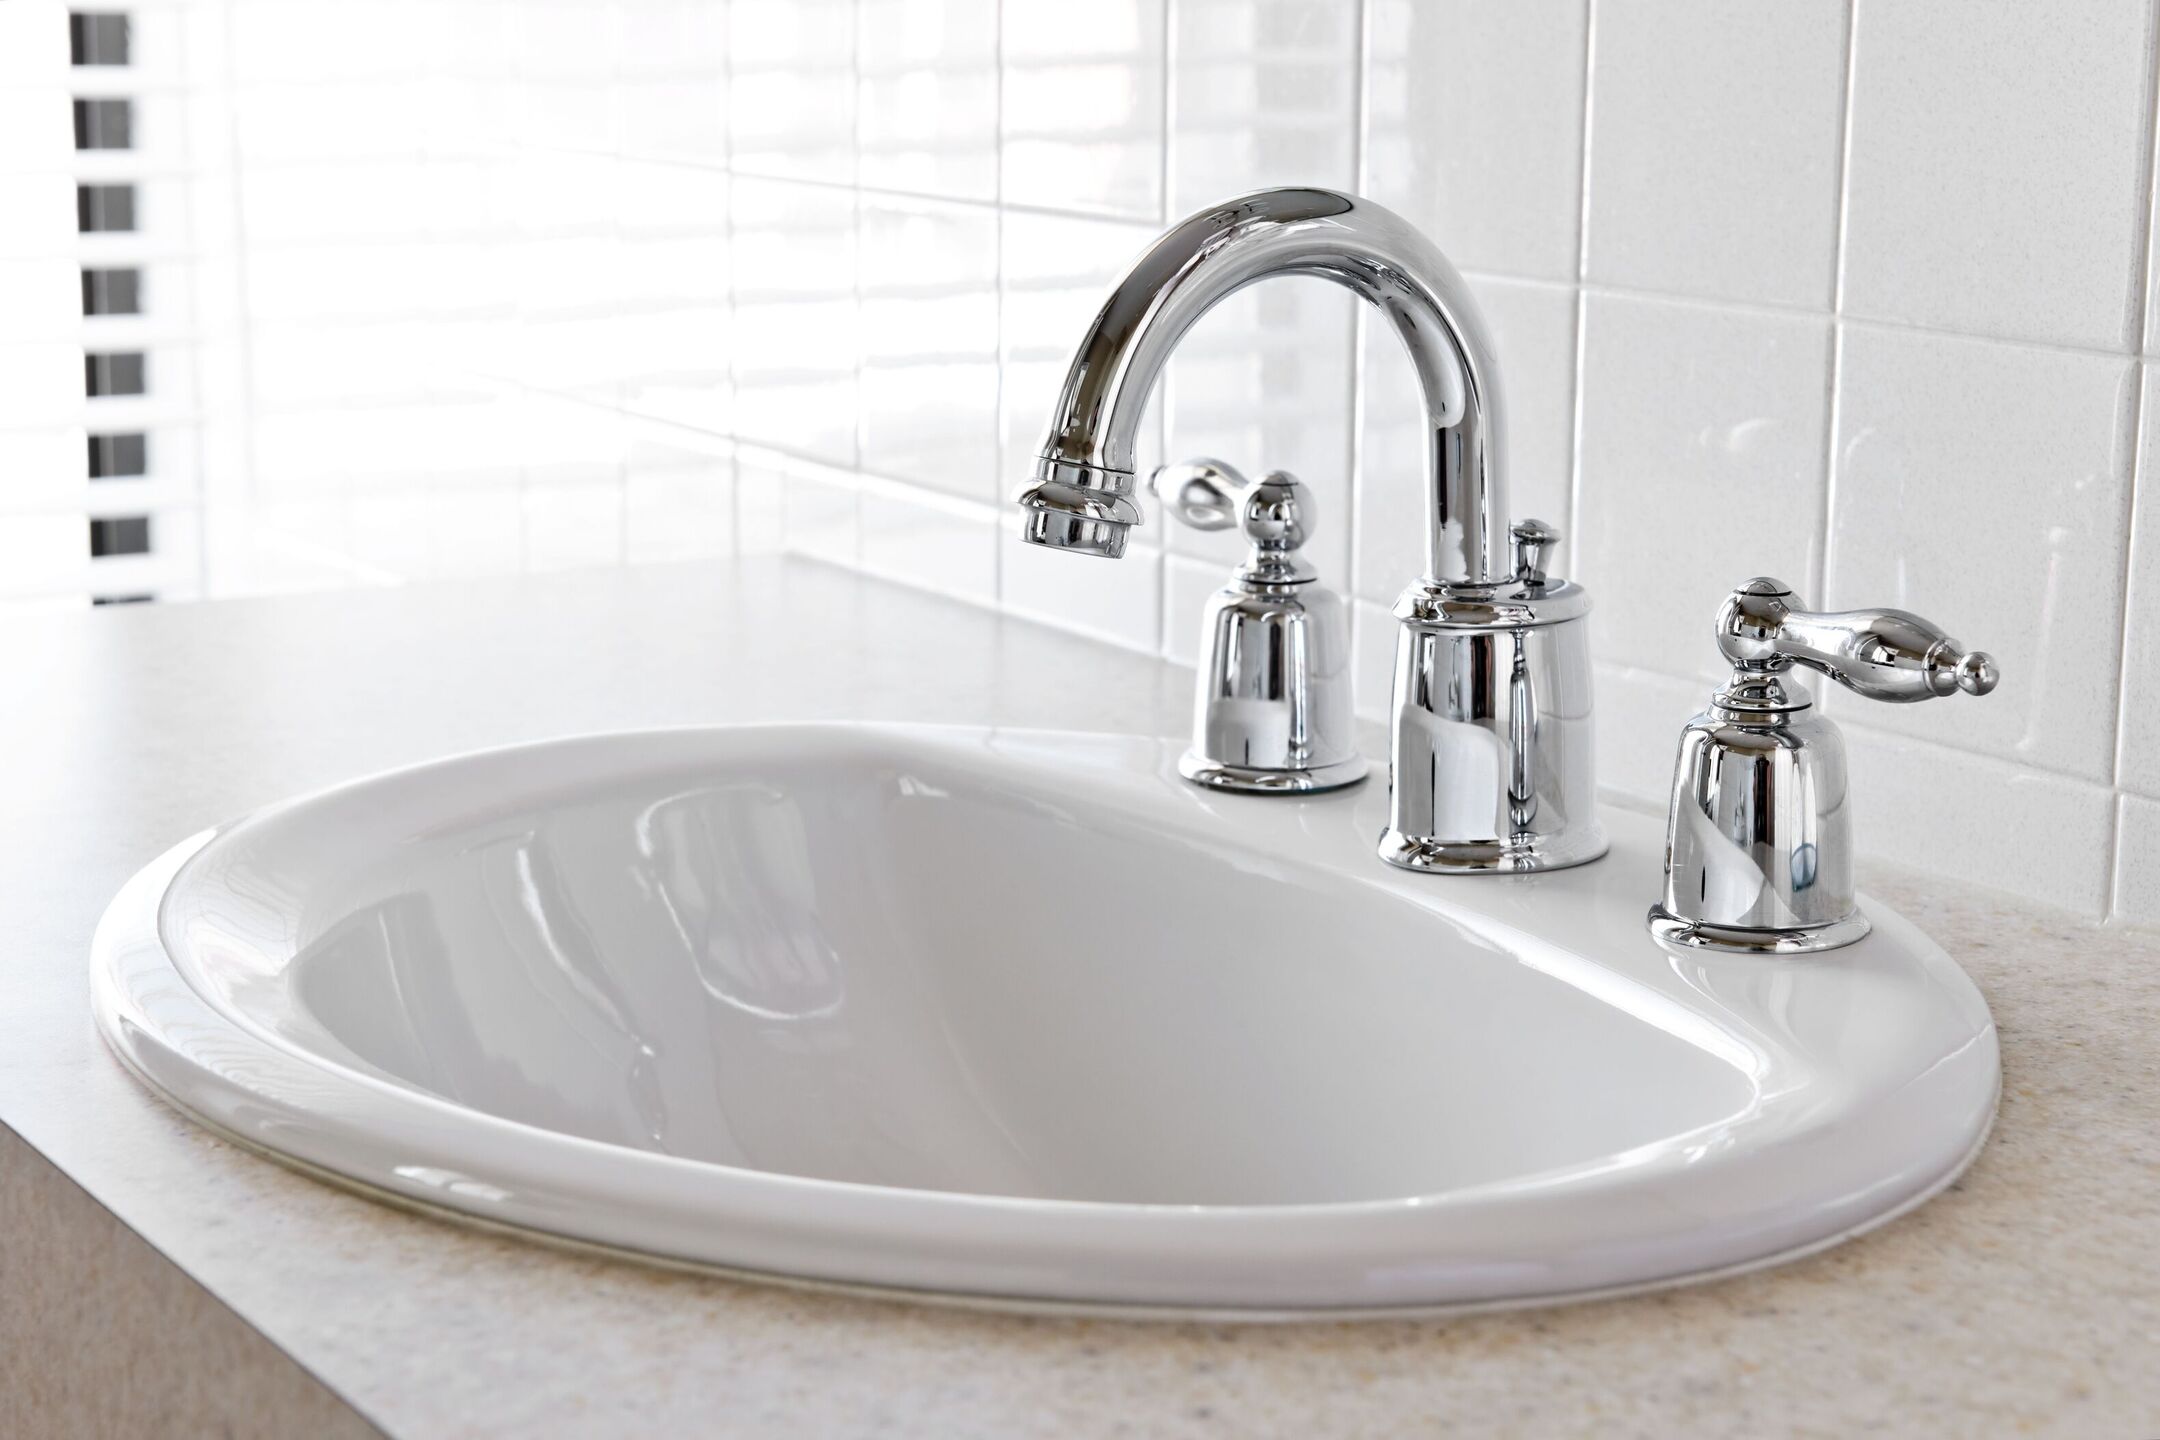 How To Install A Drop-In Bathroom Sink